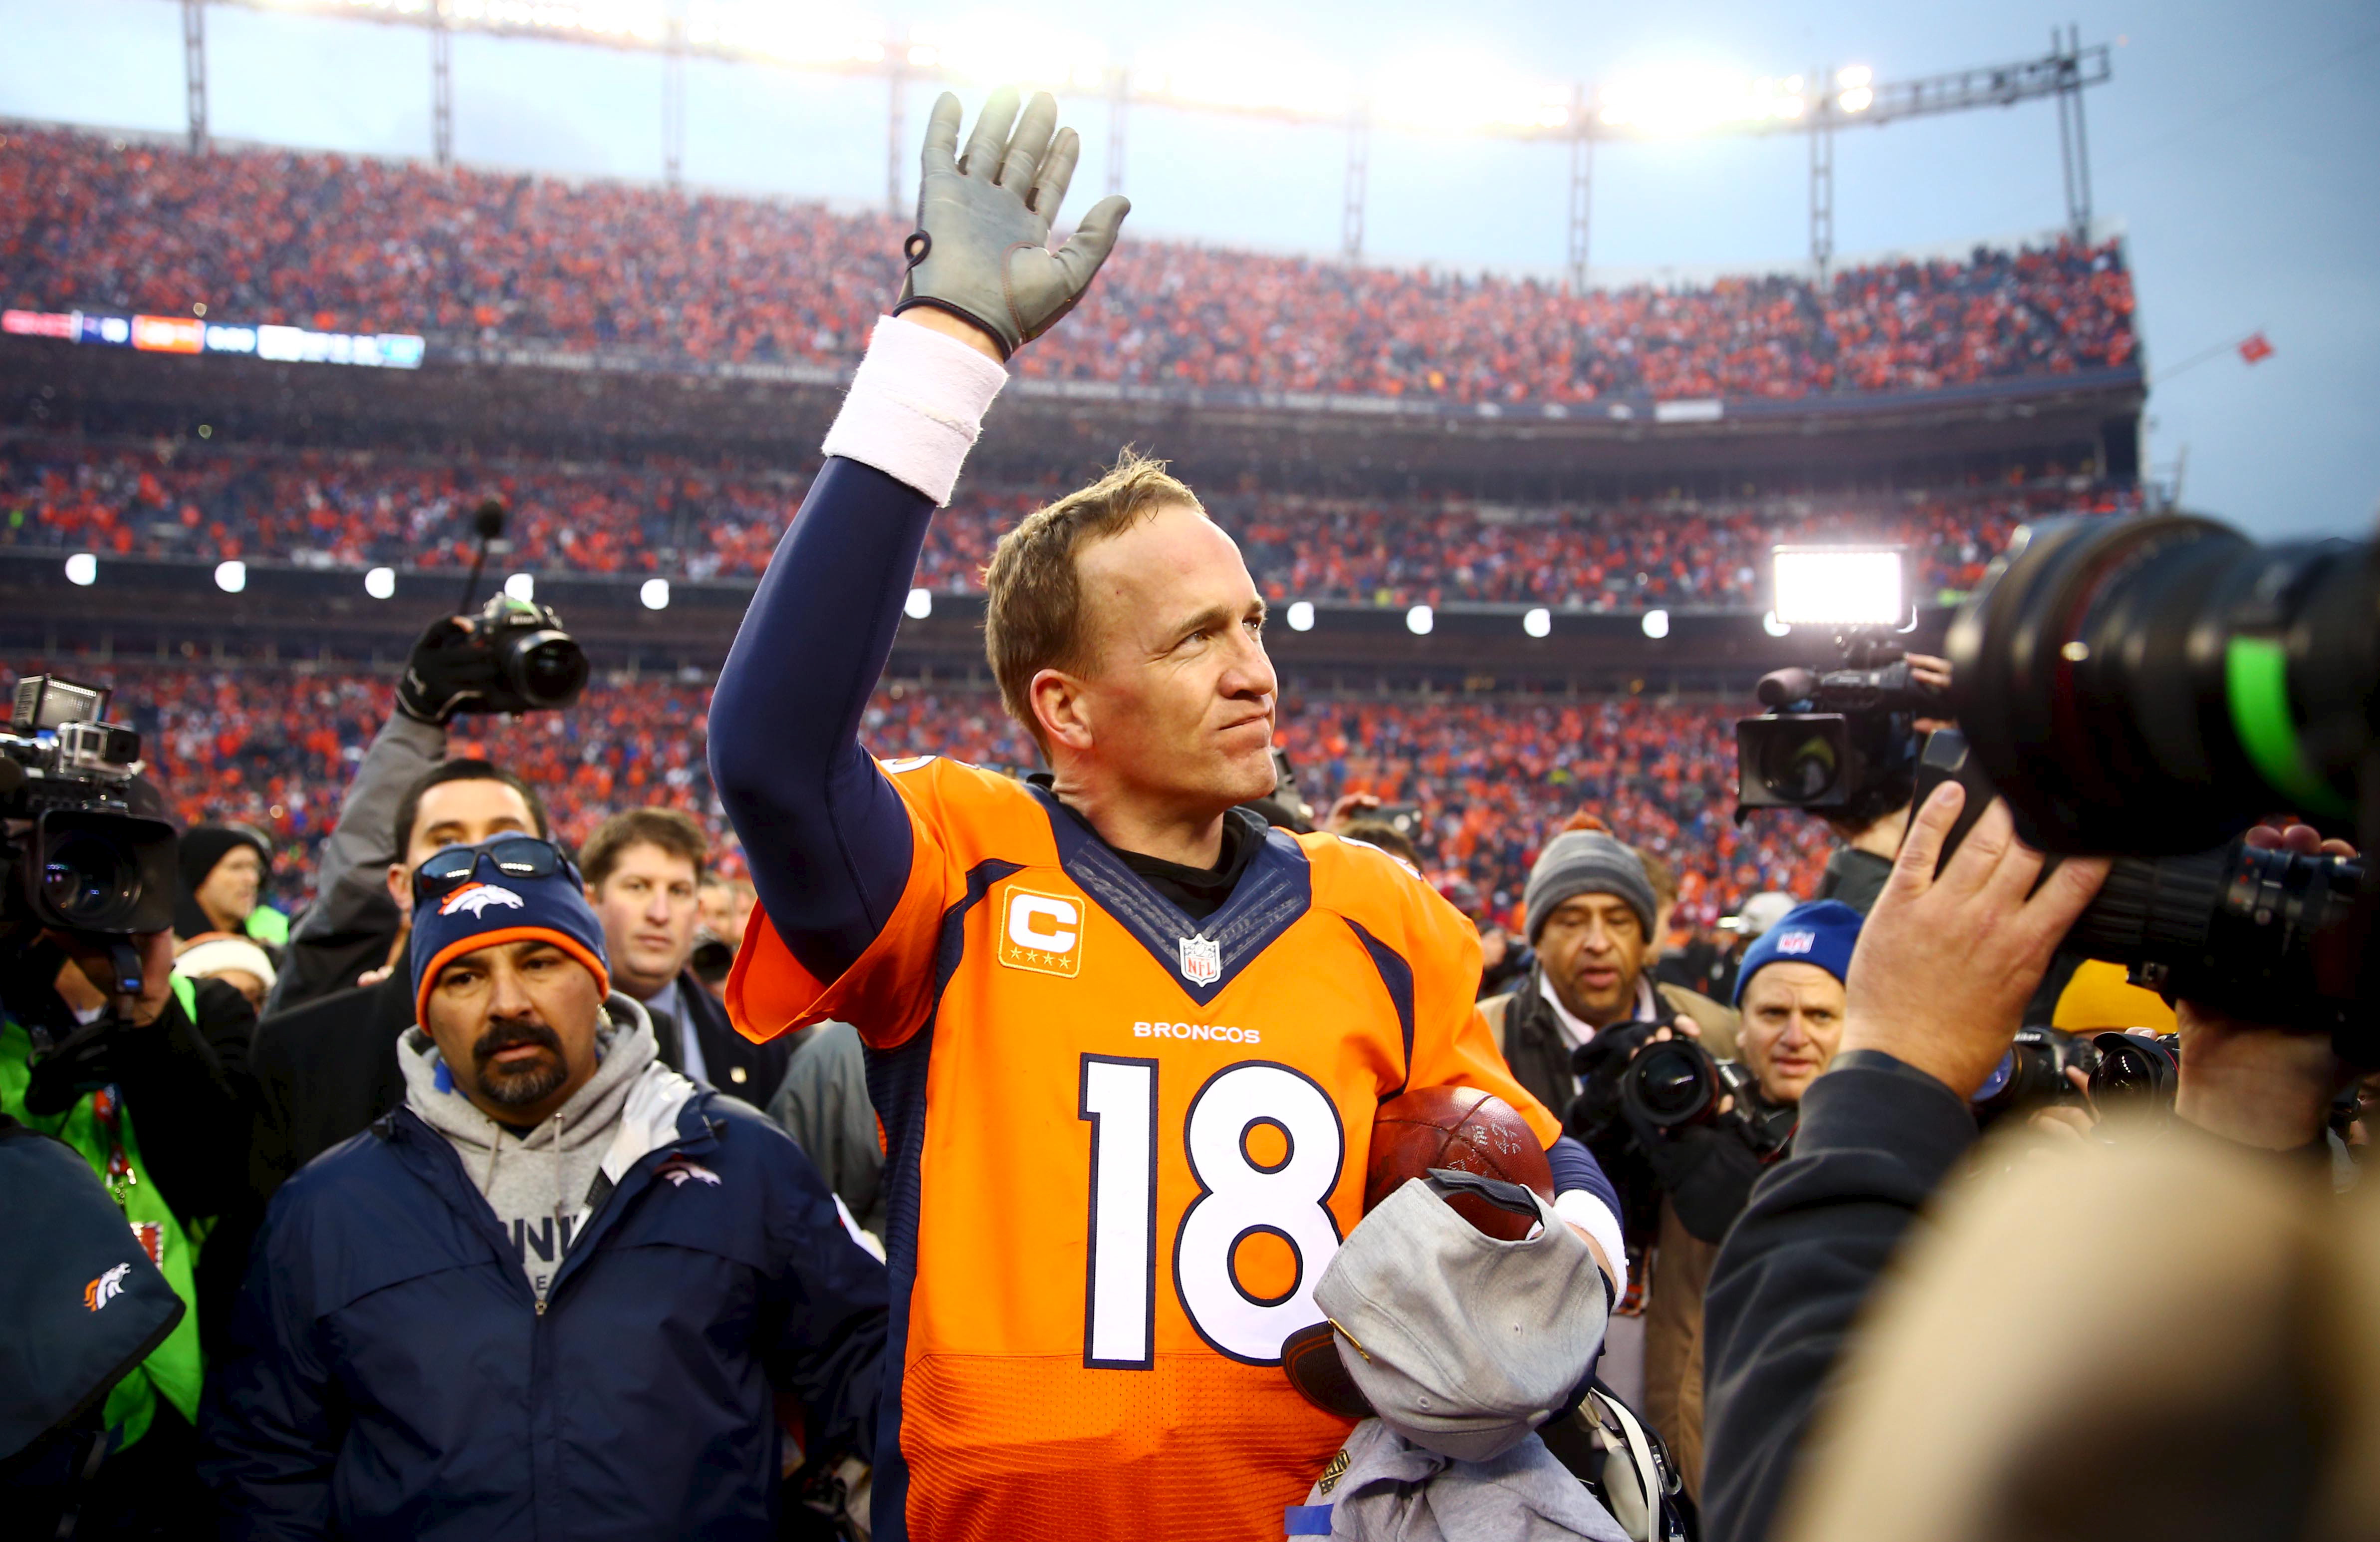 Denver Broncos quarterback Peyton Manning waves to the crowd after the AFC Championship football game against the New England Patriots at Sports Authority Field at Mile High in Denver, CO on Jan 24, 2016. (Mark J. Rebilas—USA Today Sports/Reuters)